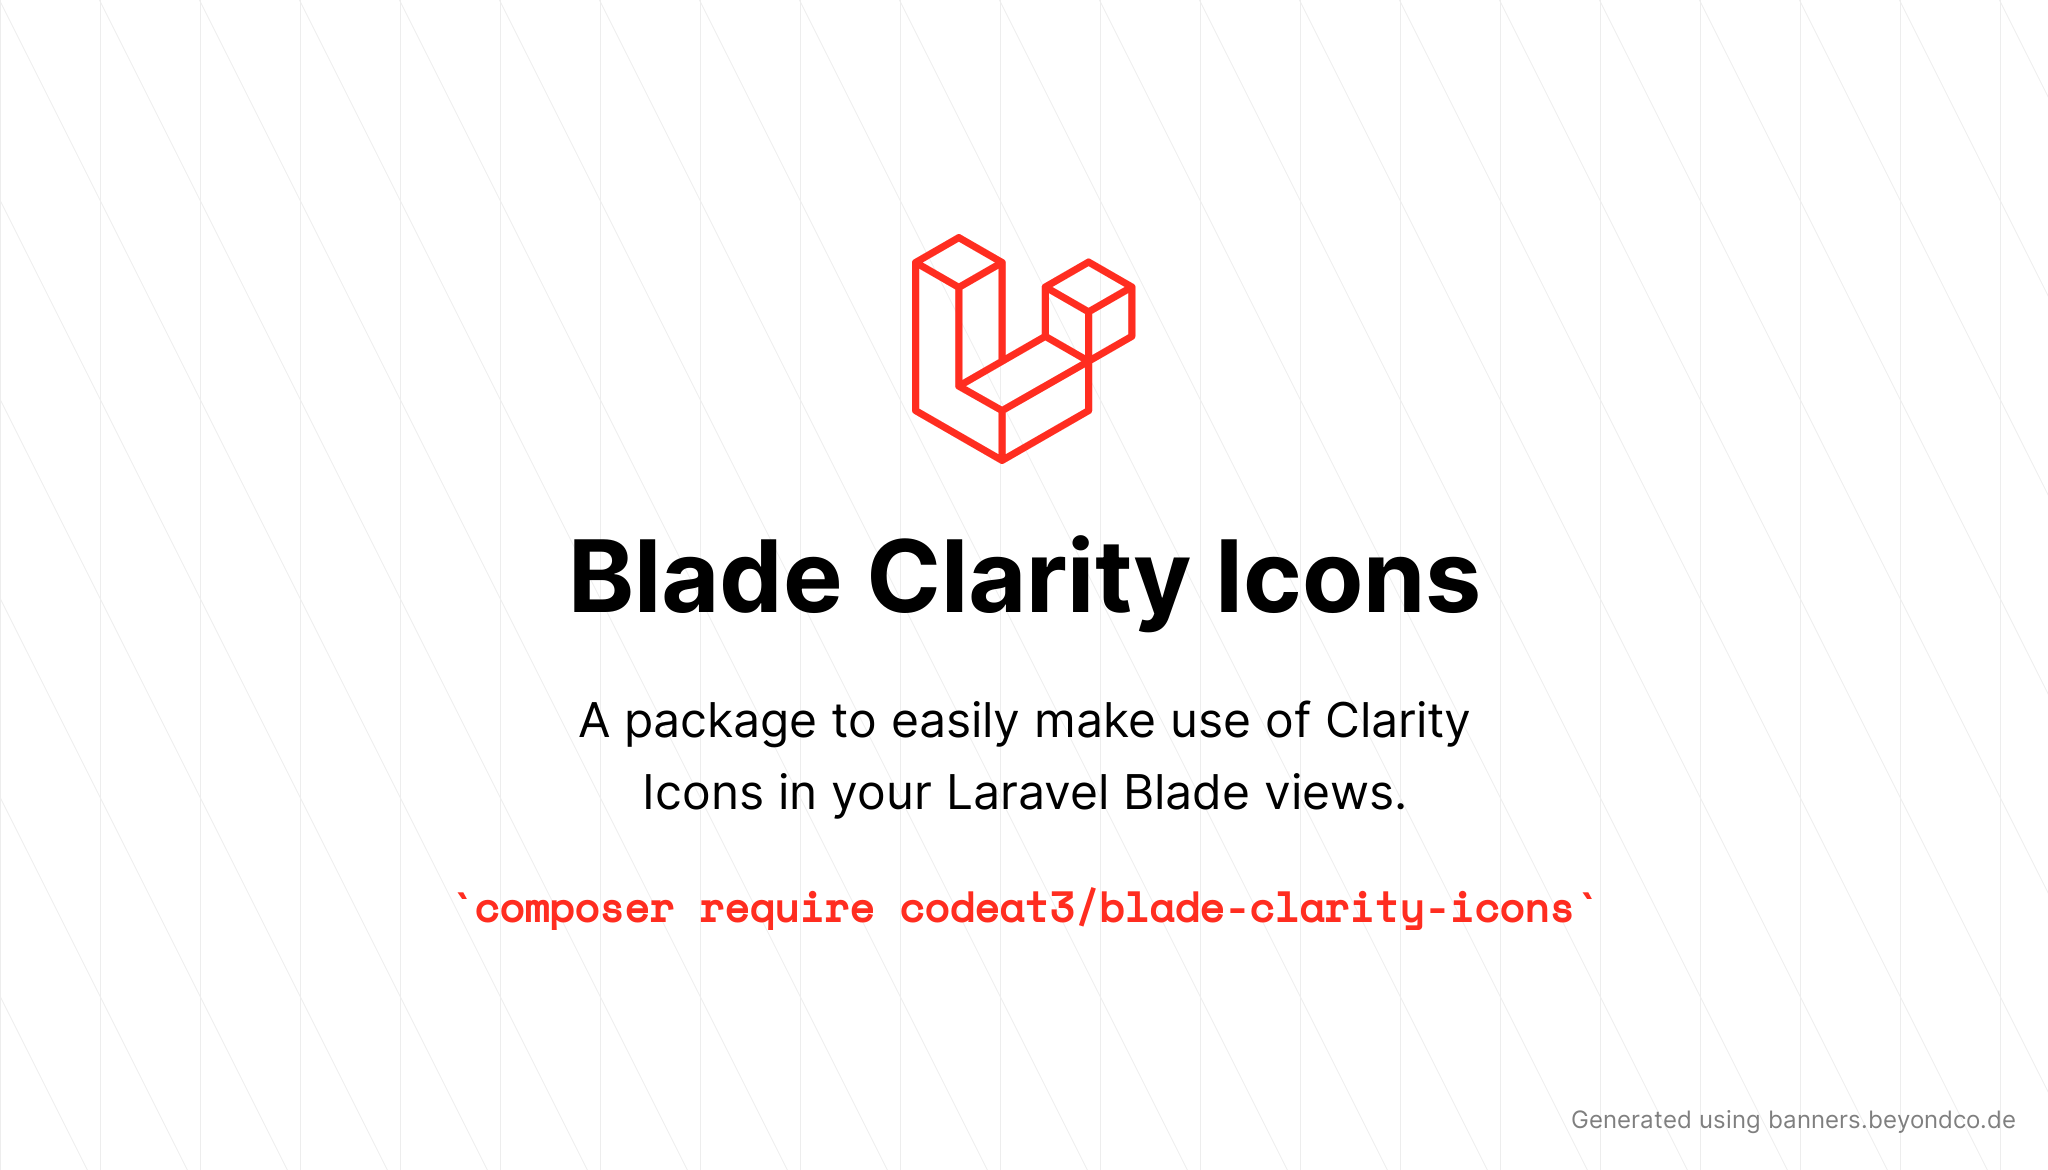 socialcard-blade-clarity-icons.png